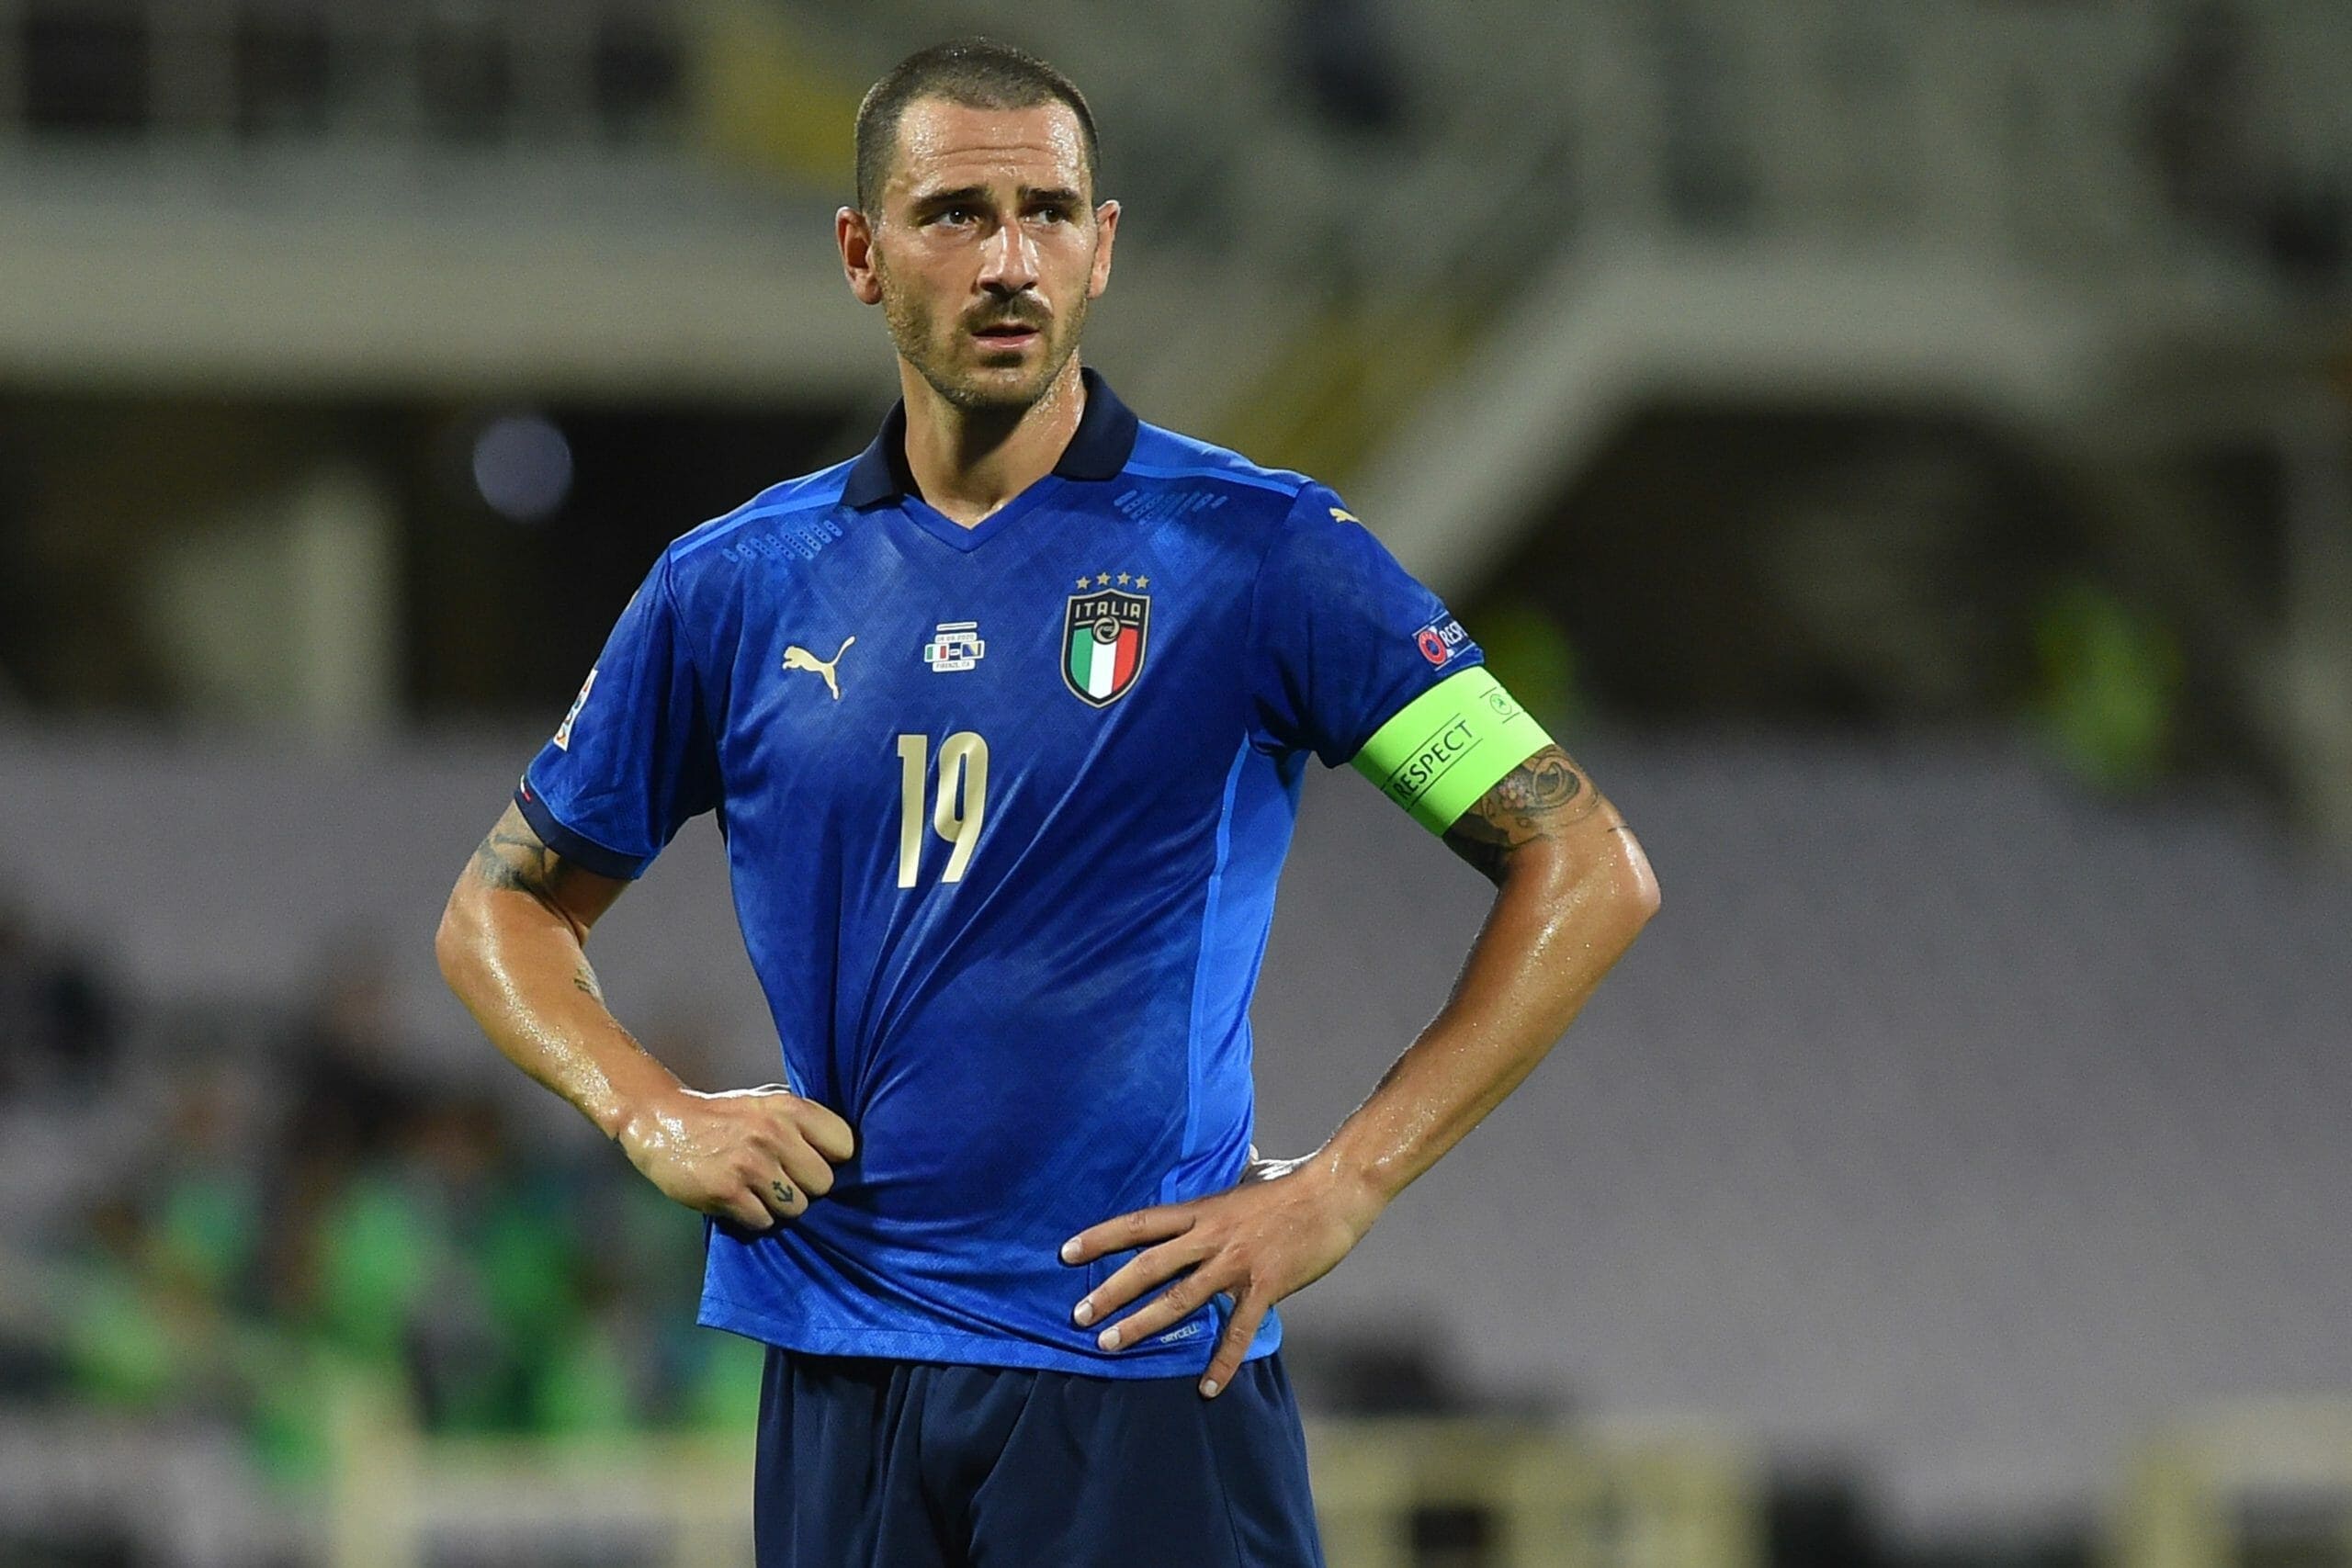 Italy Euro 2020: Best players, manager, tactics, form and chance of winning